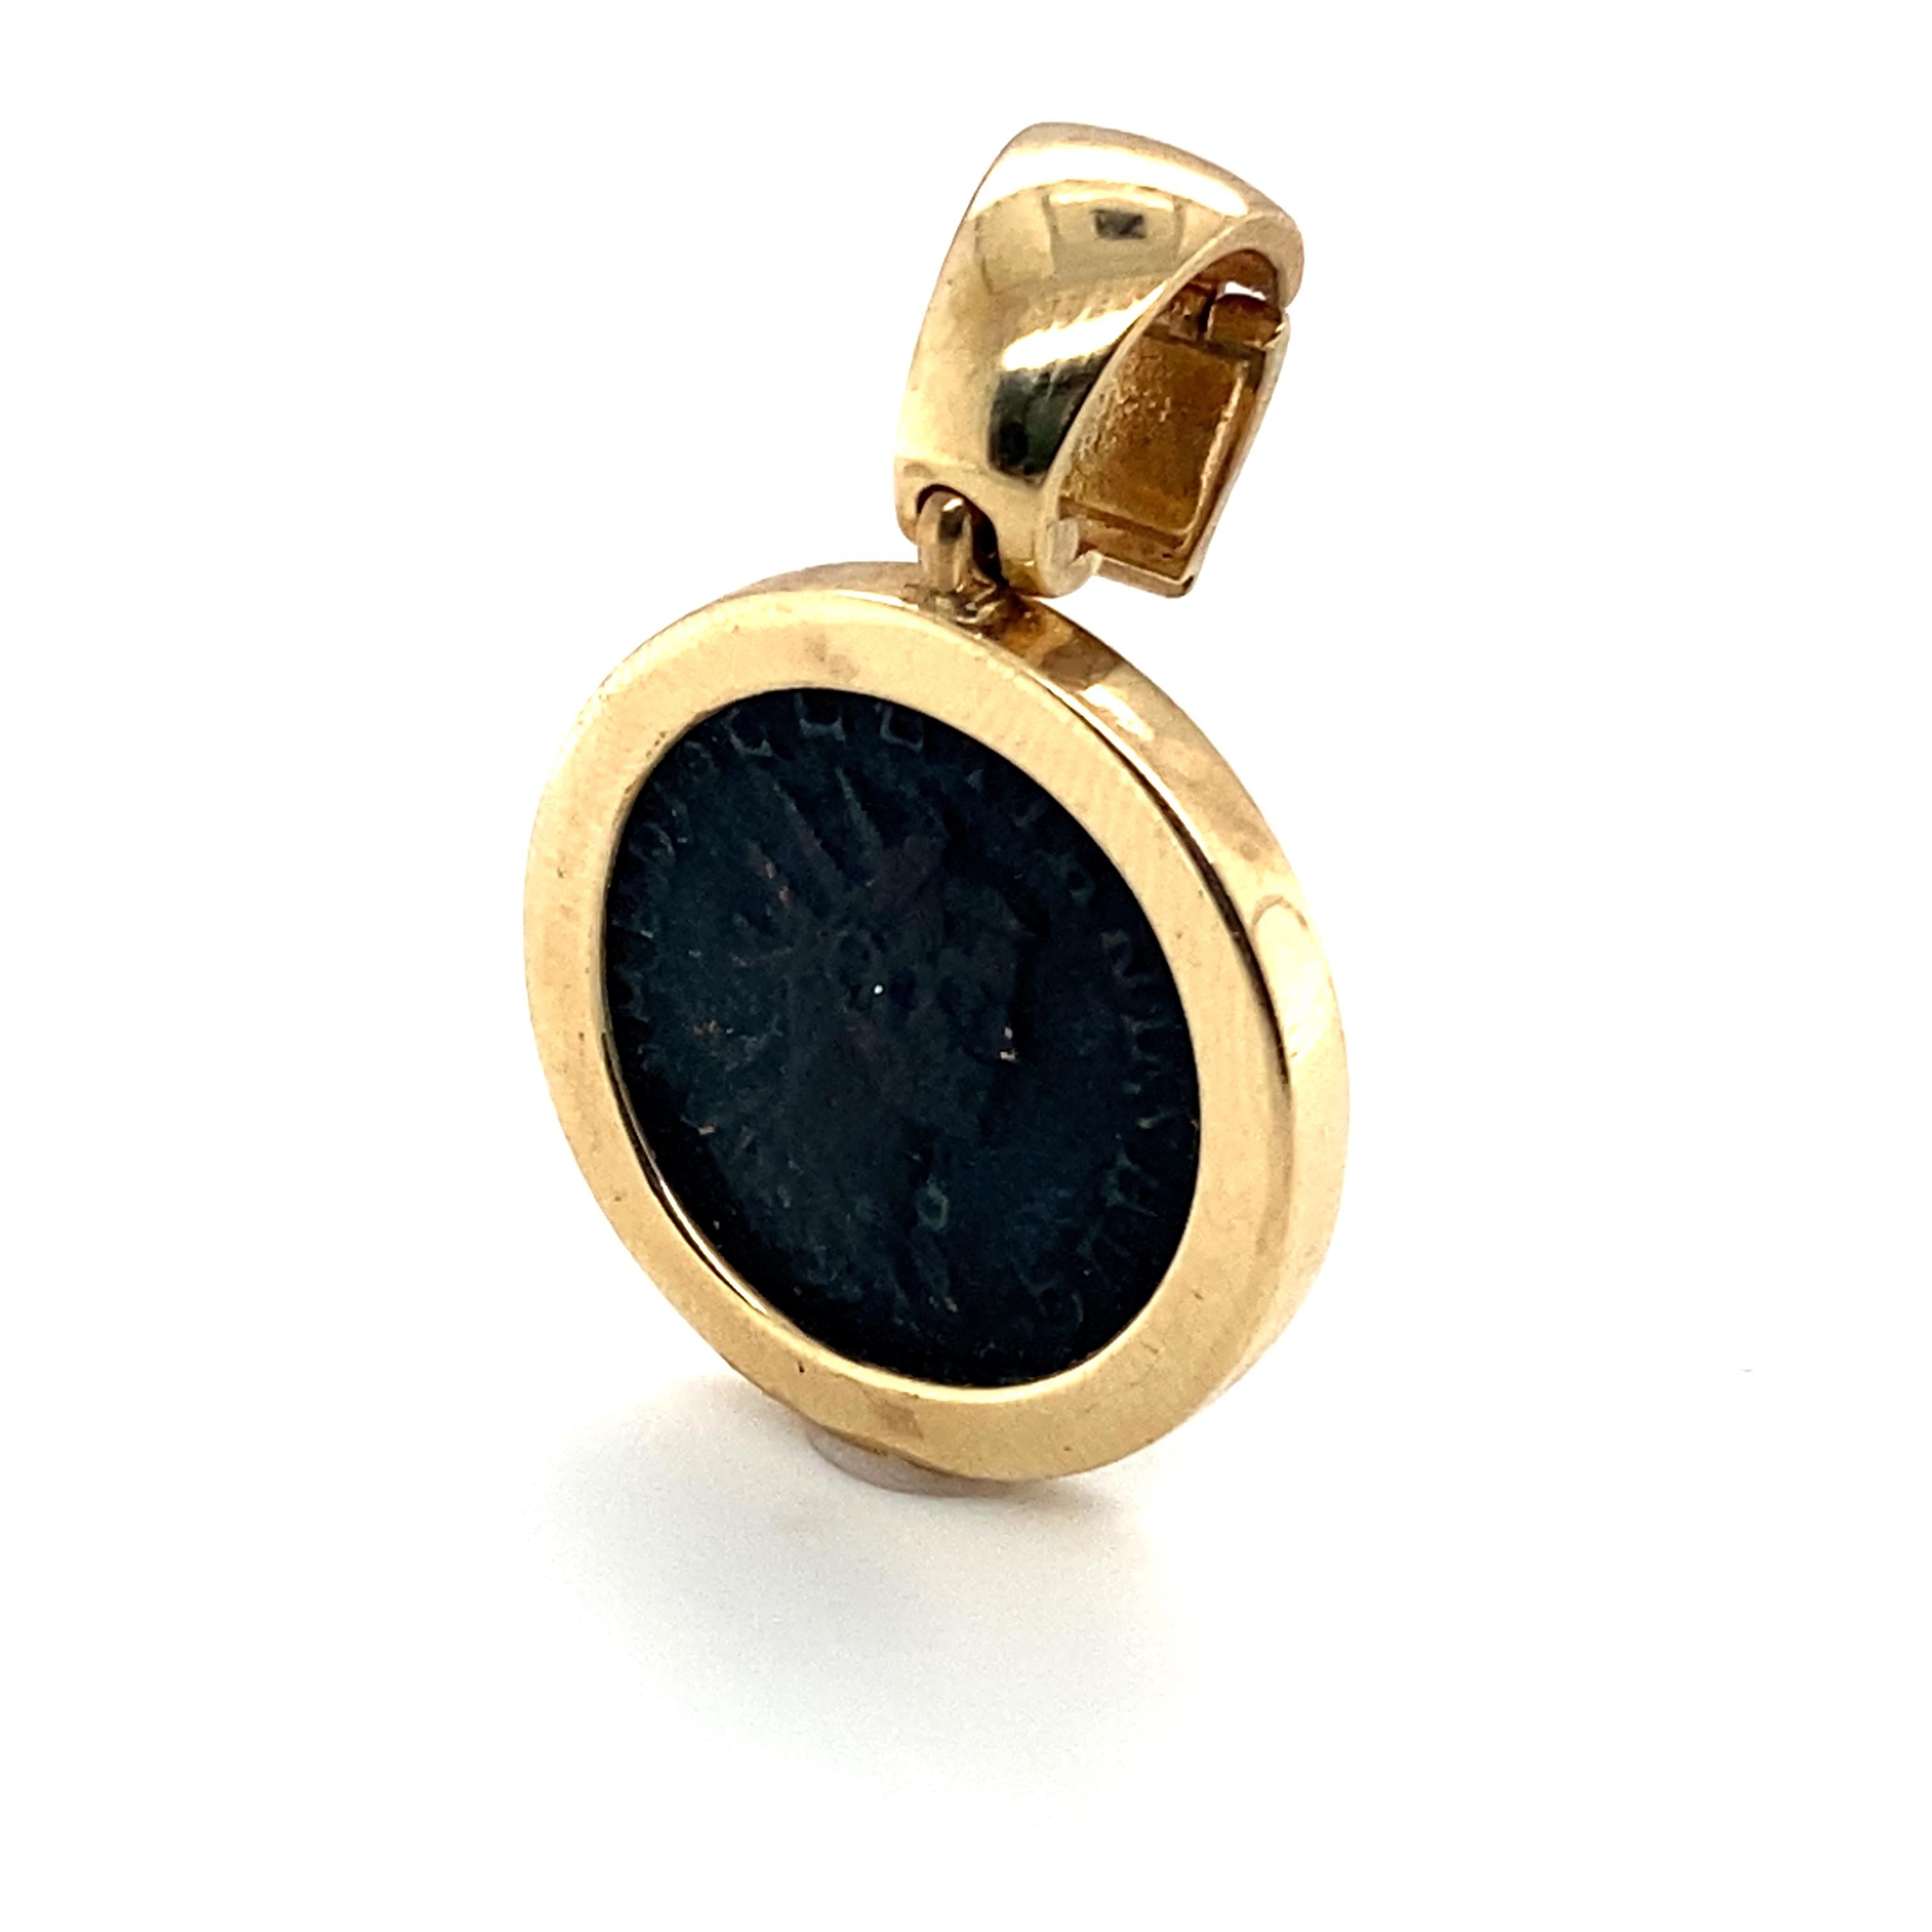 Item Details: 
Metal: 14 Karat Yellow Gold 
Weight: 7.3 grams 
Measurements: 1 inch x 1 inch 
Hallmark: 14 Karat Italy (under the clasp)

Item Features: 
This beautiful classic roman pendant has an antique coin that has a stunning bronzed look. This